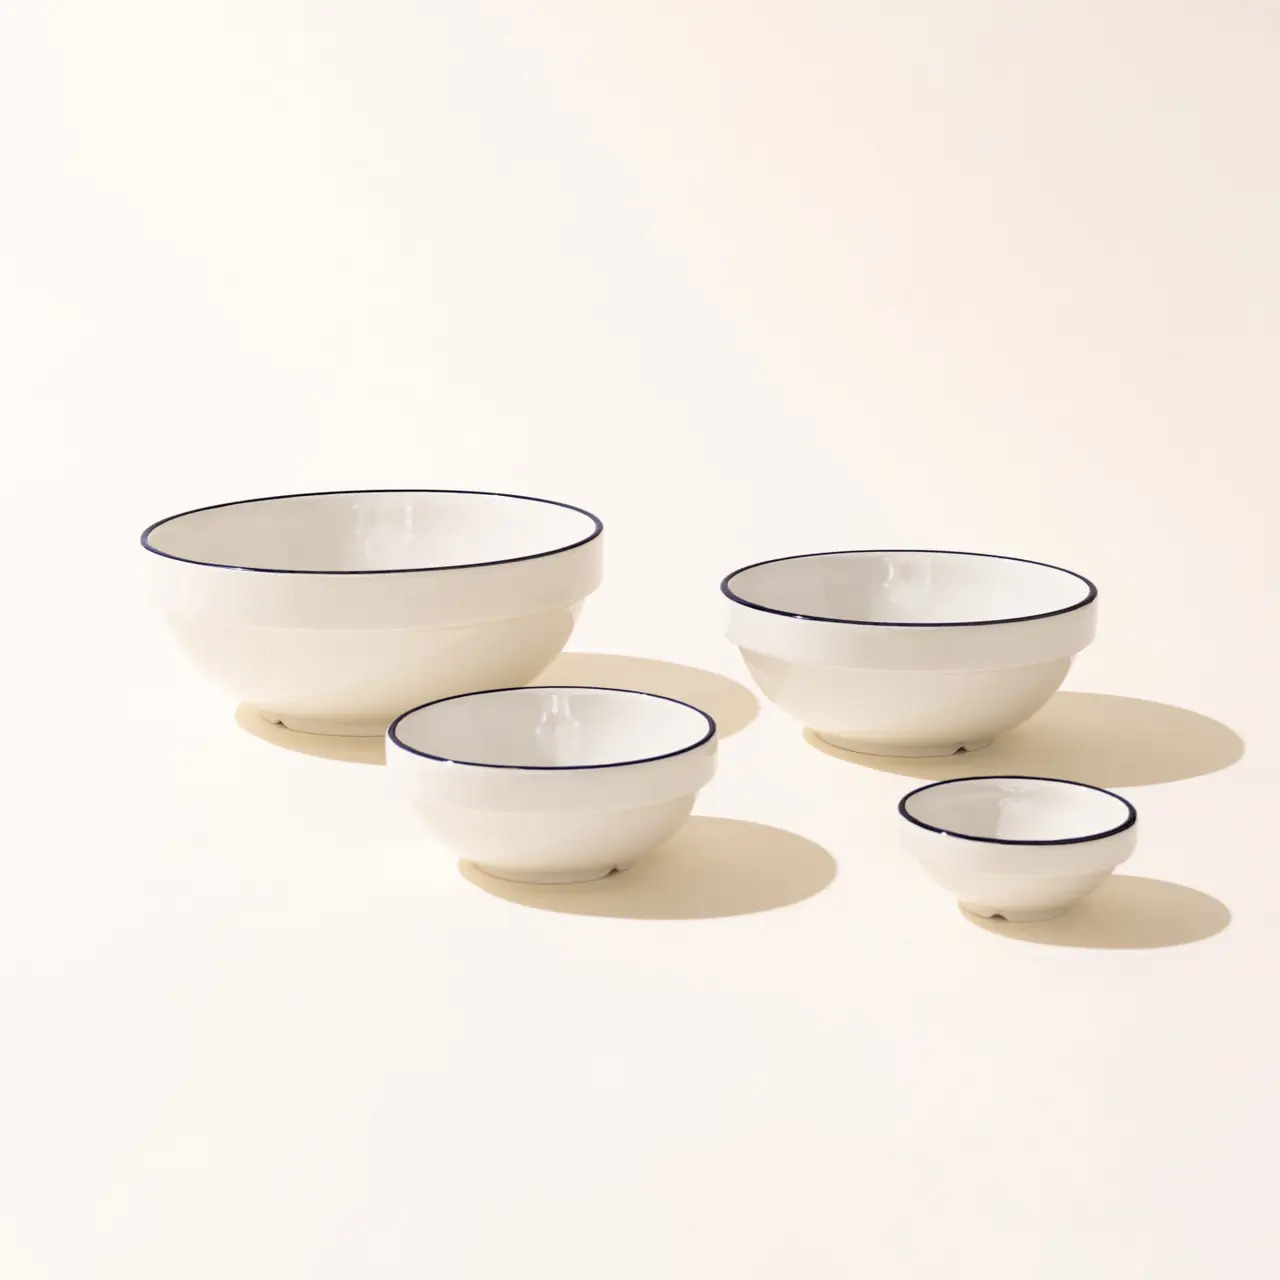 Four white ceramic bowls with navy blue rims are arranged in descending size order on a light background.